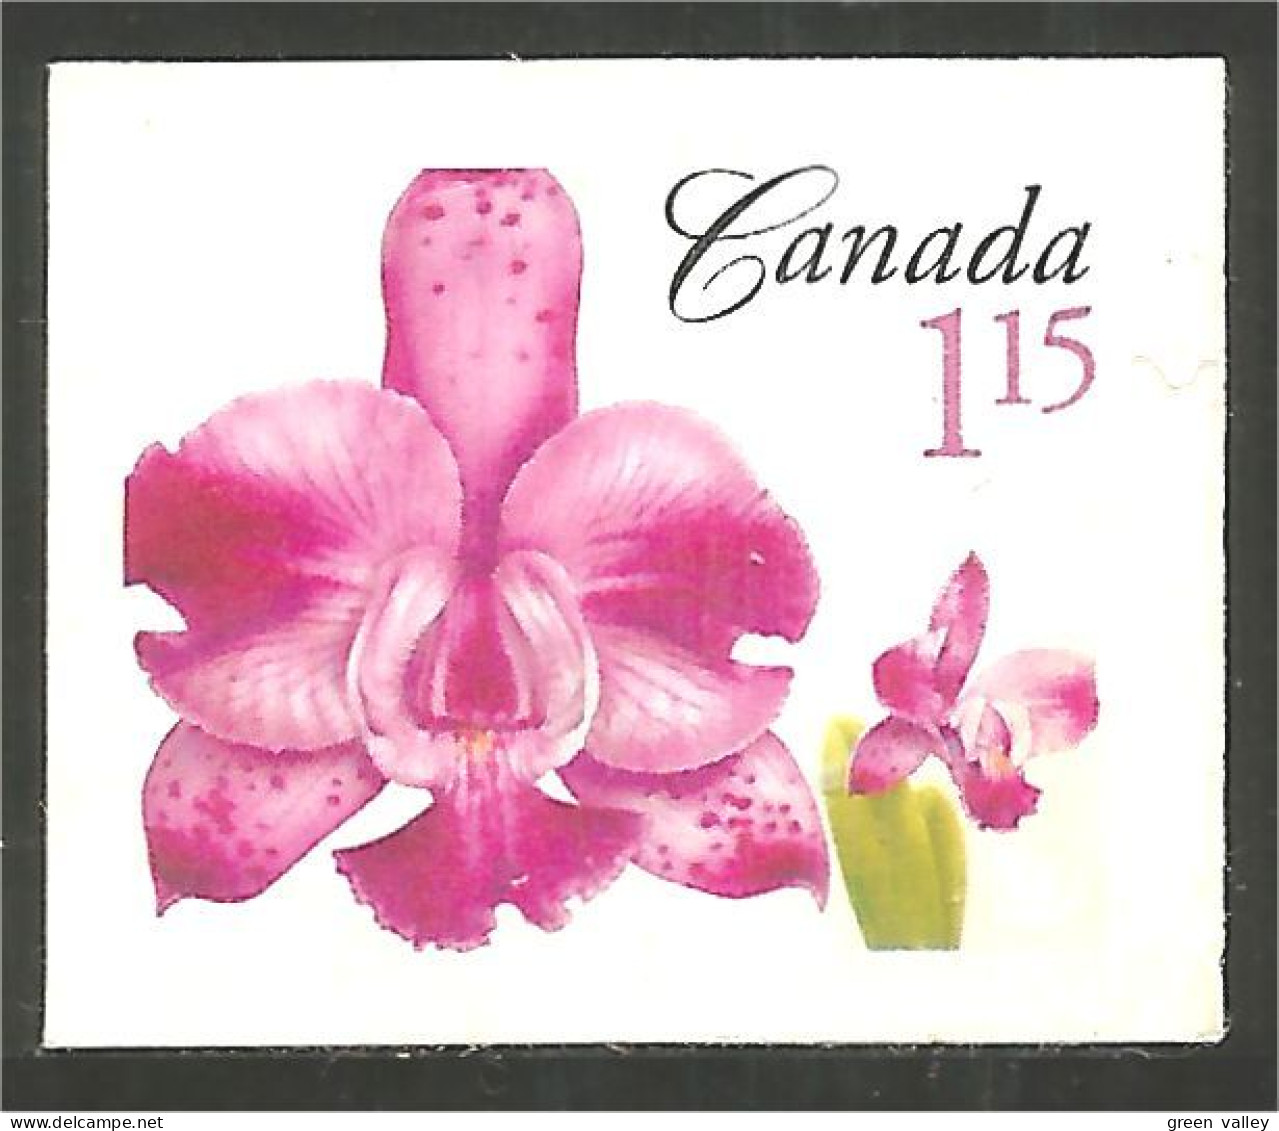 Canada Memoria Evelyn Light Mint No Gum (11-001) - Used Stamps